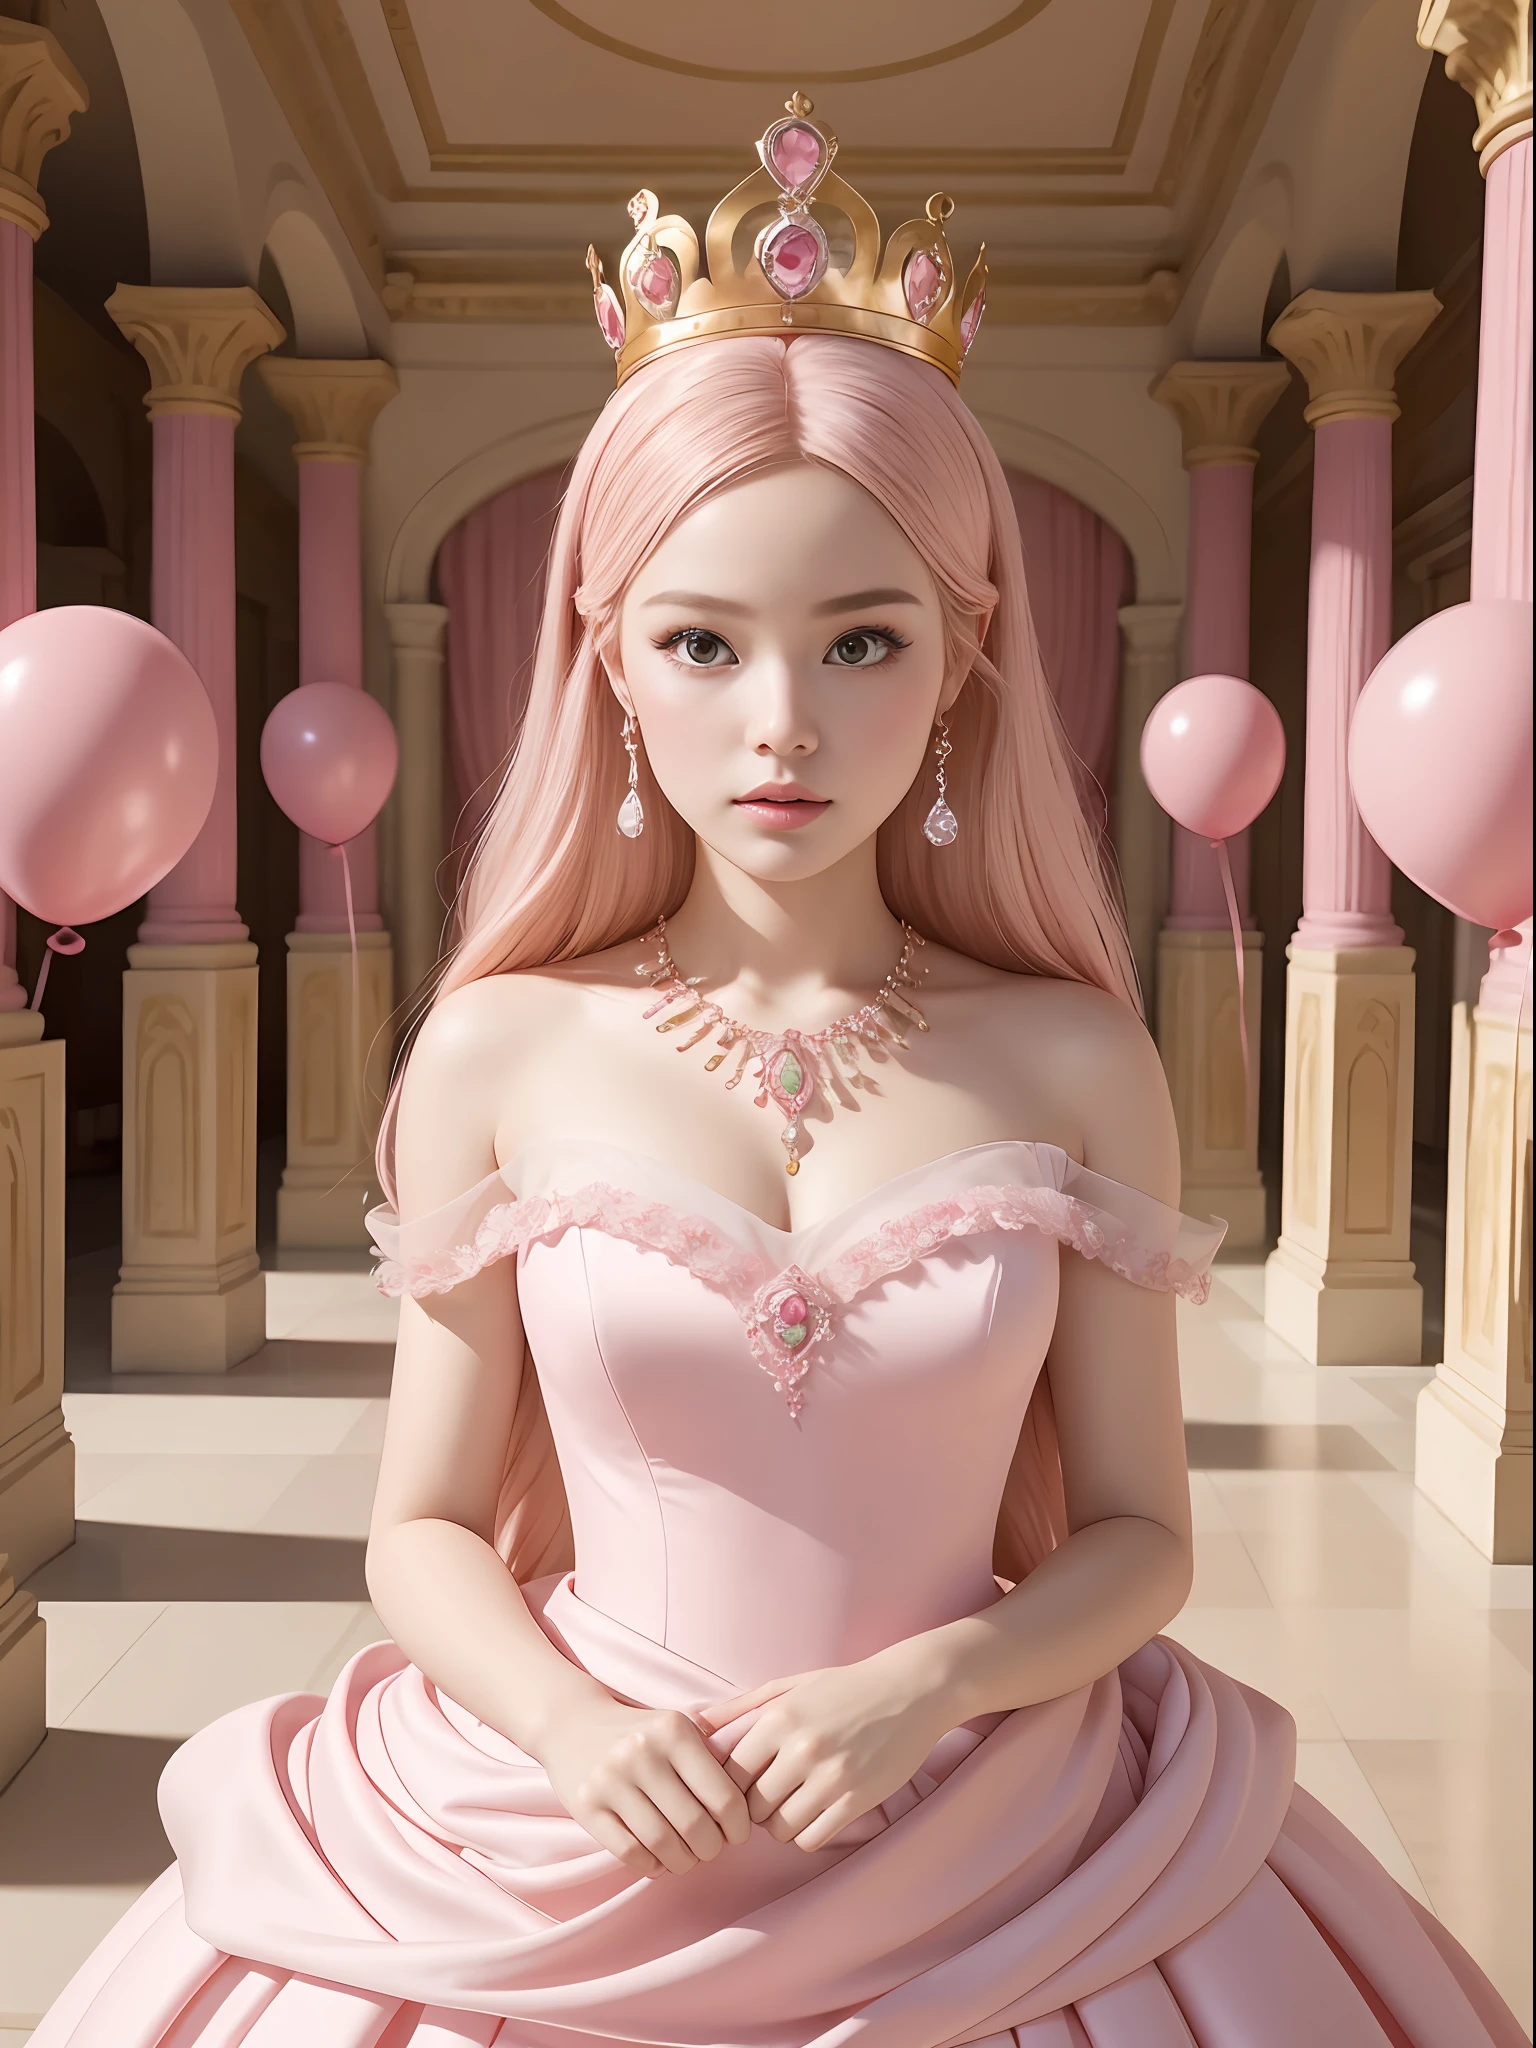 A Barbie princess wearing a lovely pink dress, wearing a beautiful crown, an indoor photography of a labyrinth of monumental, inflated pink balloons, an art installation by Martin Creed, ((Full body shot)), pink background, delicate face, white skin, delicate facial features, perfect facial features, delicate hair portrayal, delicate eyes portrayal, 8k picture quality, atmosphere sense, the highest quality, masterwork, extreme detail, high resolution, blurry foreground, foreshortening, high quality, Masterpiece, best quality